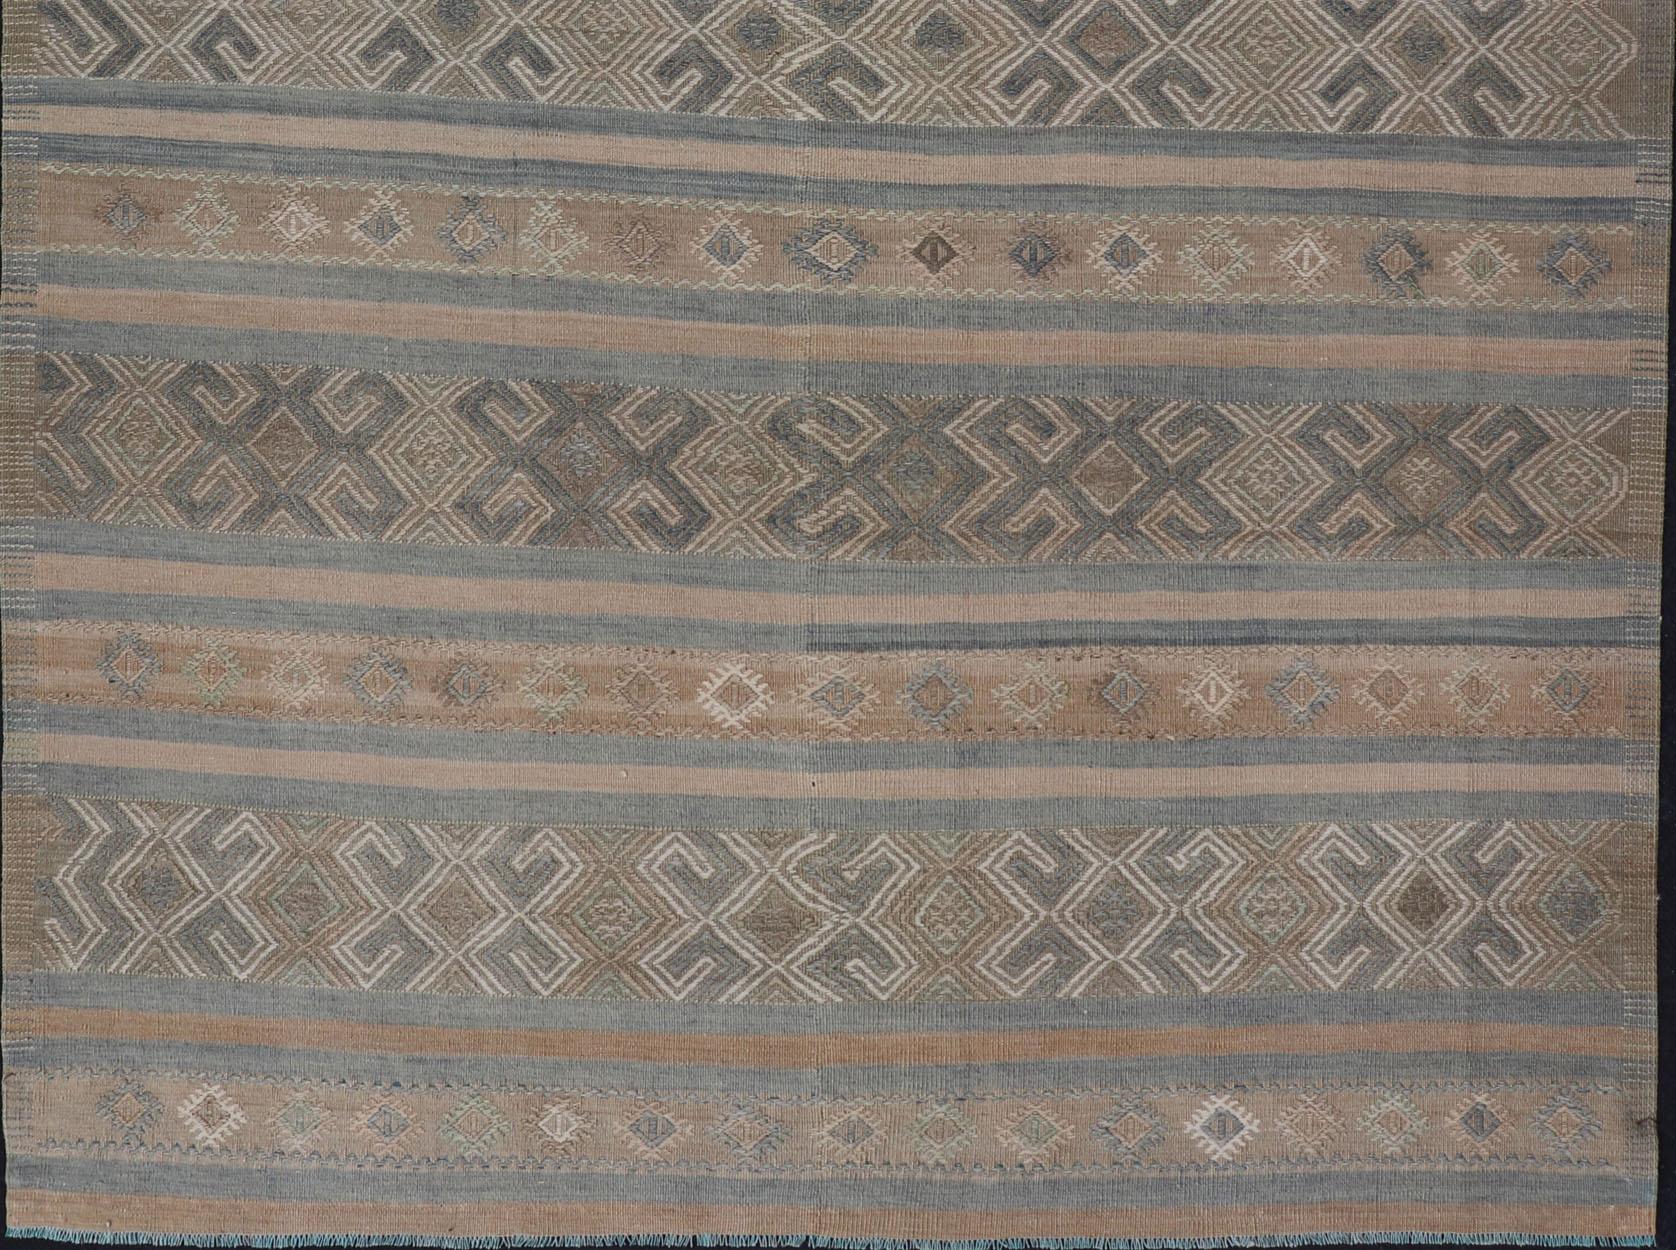 This flat-woven Kilim from Turkey features an enticing composition consisting of stripes with fascinating geometric designs rendered in natural tones of brown and tan, taupe, as well as some blue shades. 

Measures: 5'7 x 8'8.

Vintage Turkish